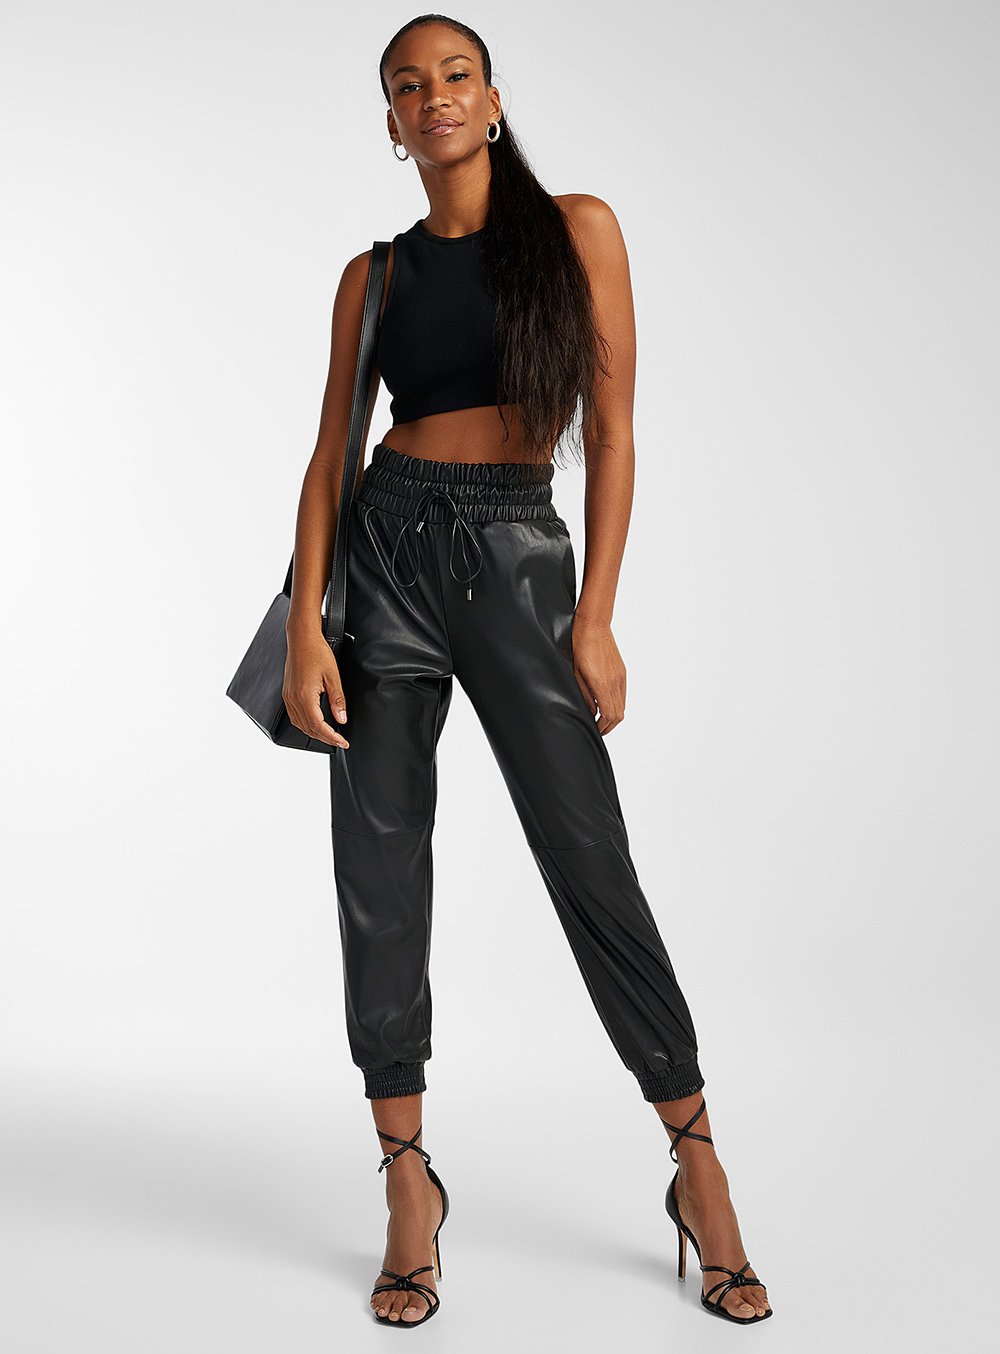 A model wearing faux-leather cuffed joggers for a round-up of leather pants.